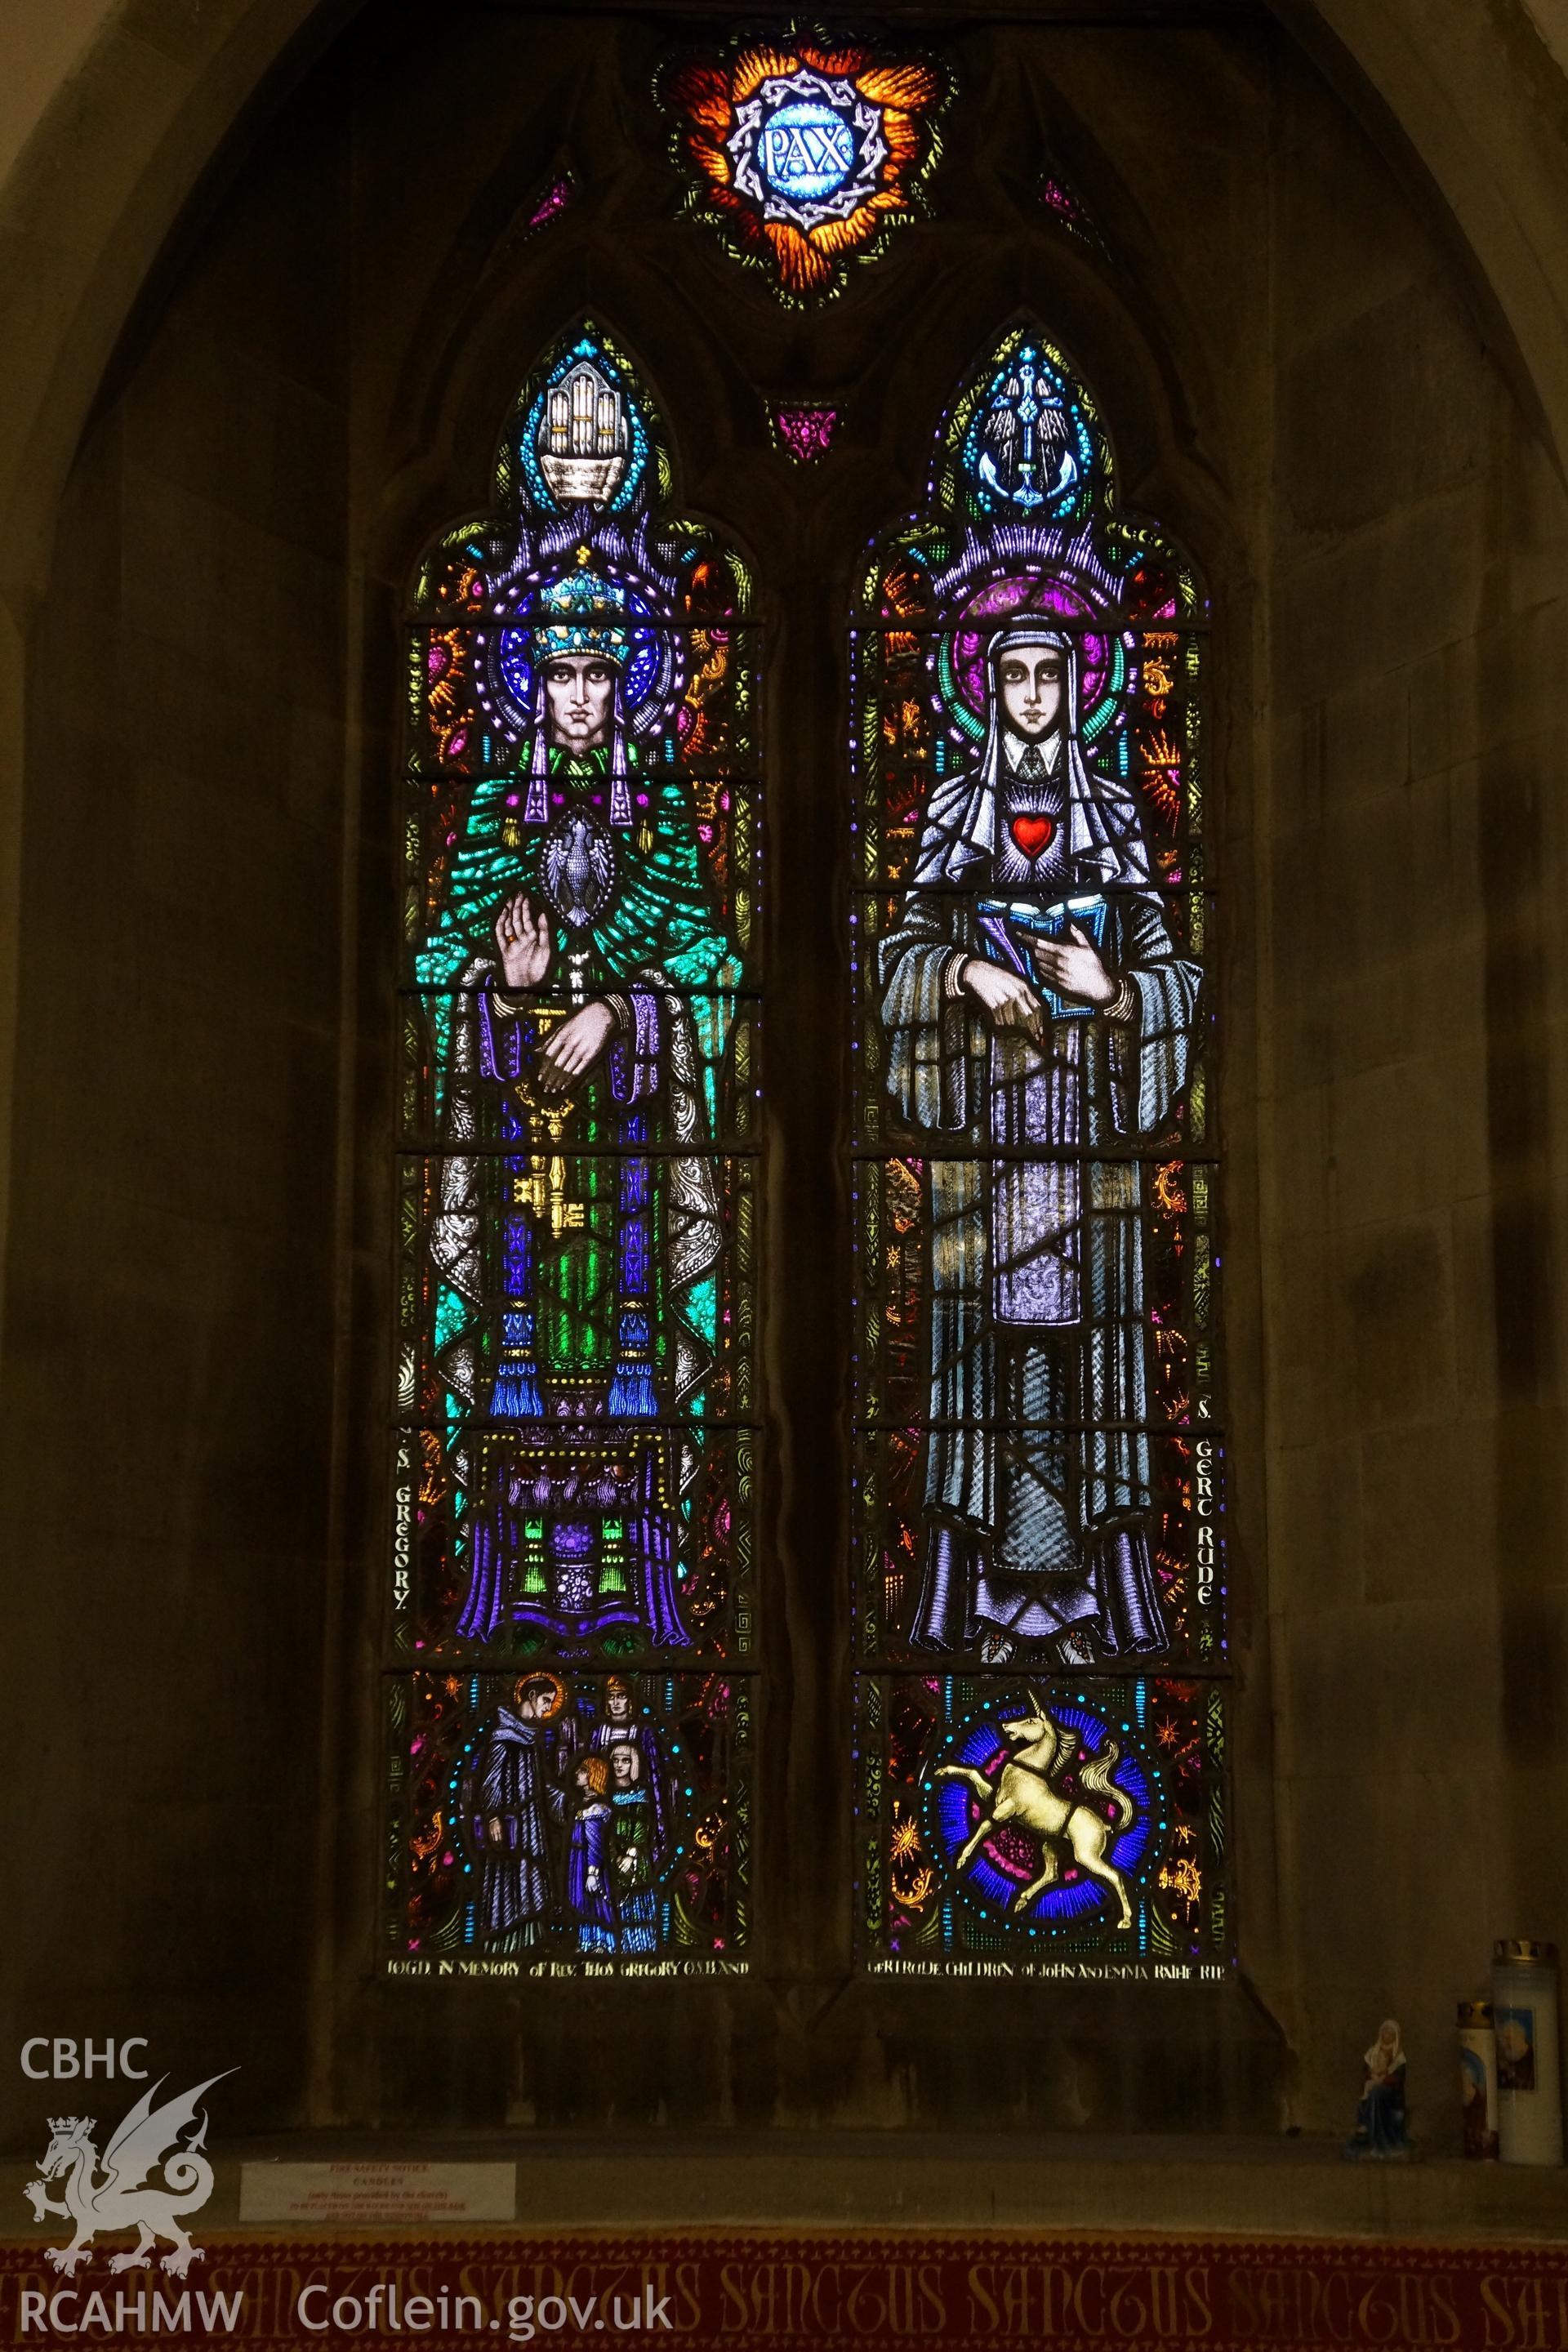 Digital colour photograph showing the Arts and Crafts stained glass windows in St David's Catholic church, Pantasaph.